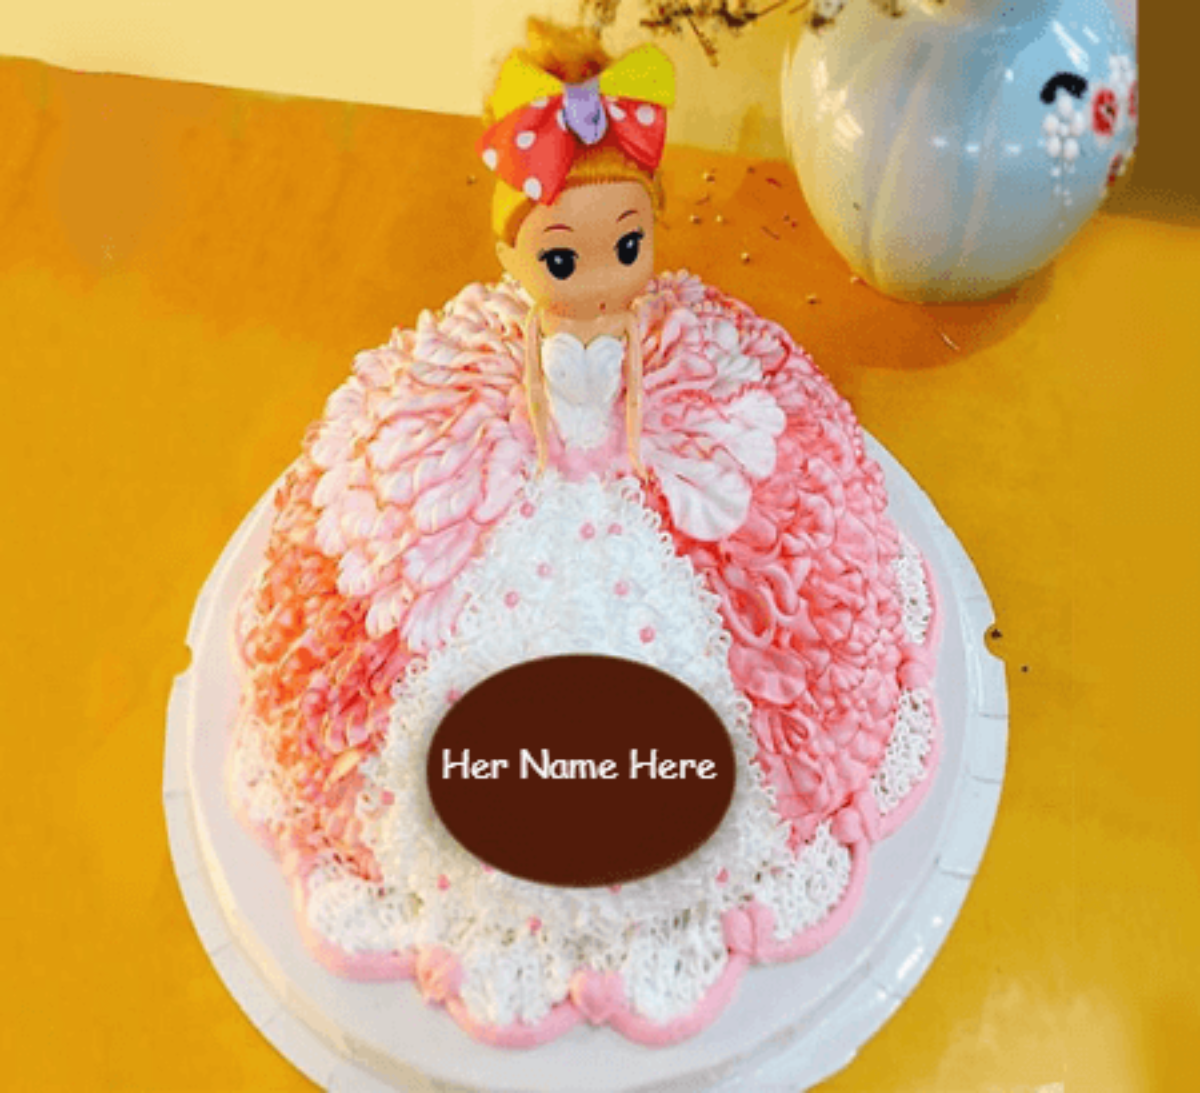 Birthday cakes for baby girl - Unique Beautiful Cake with Name